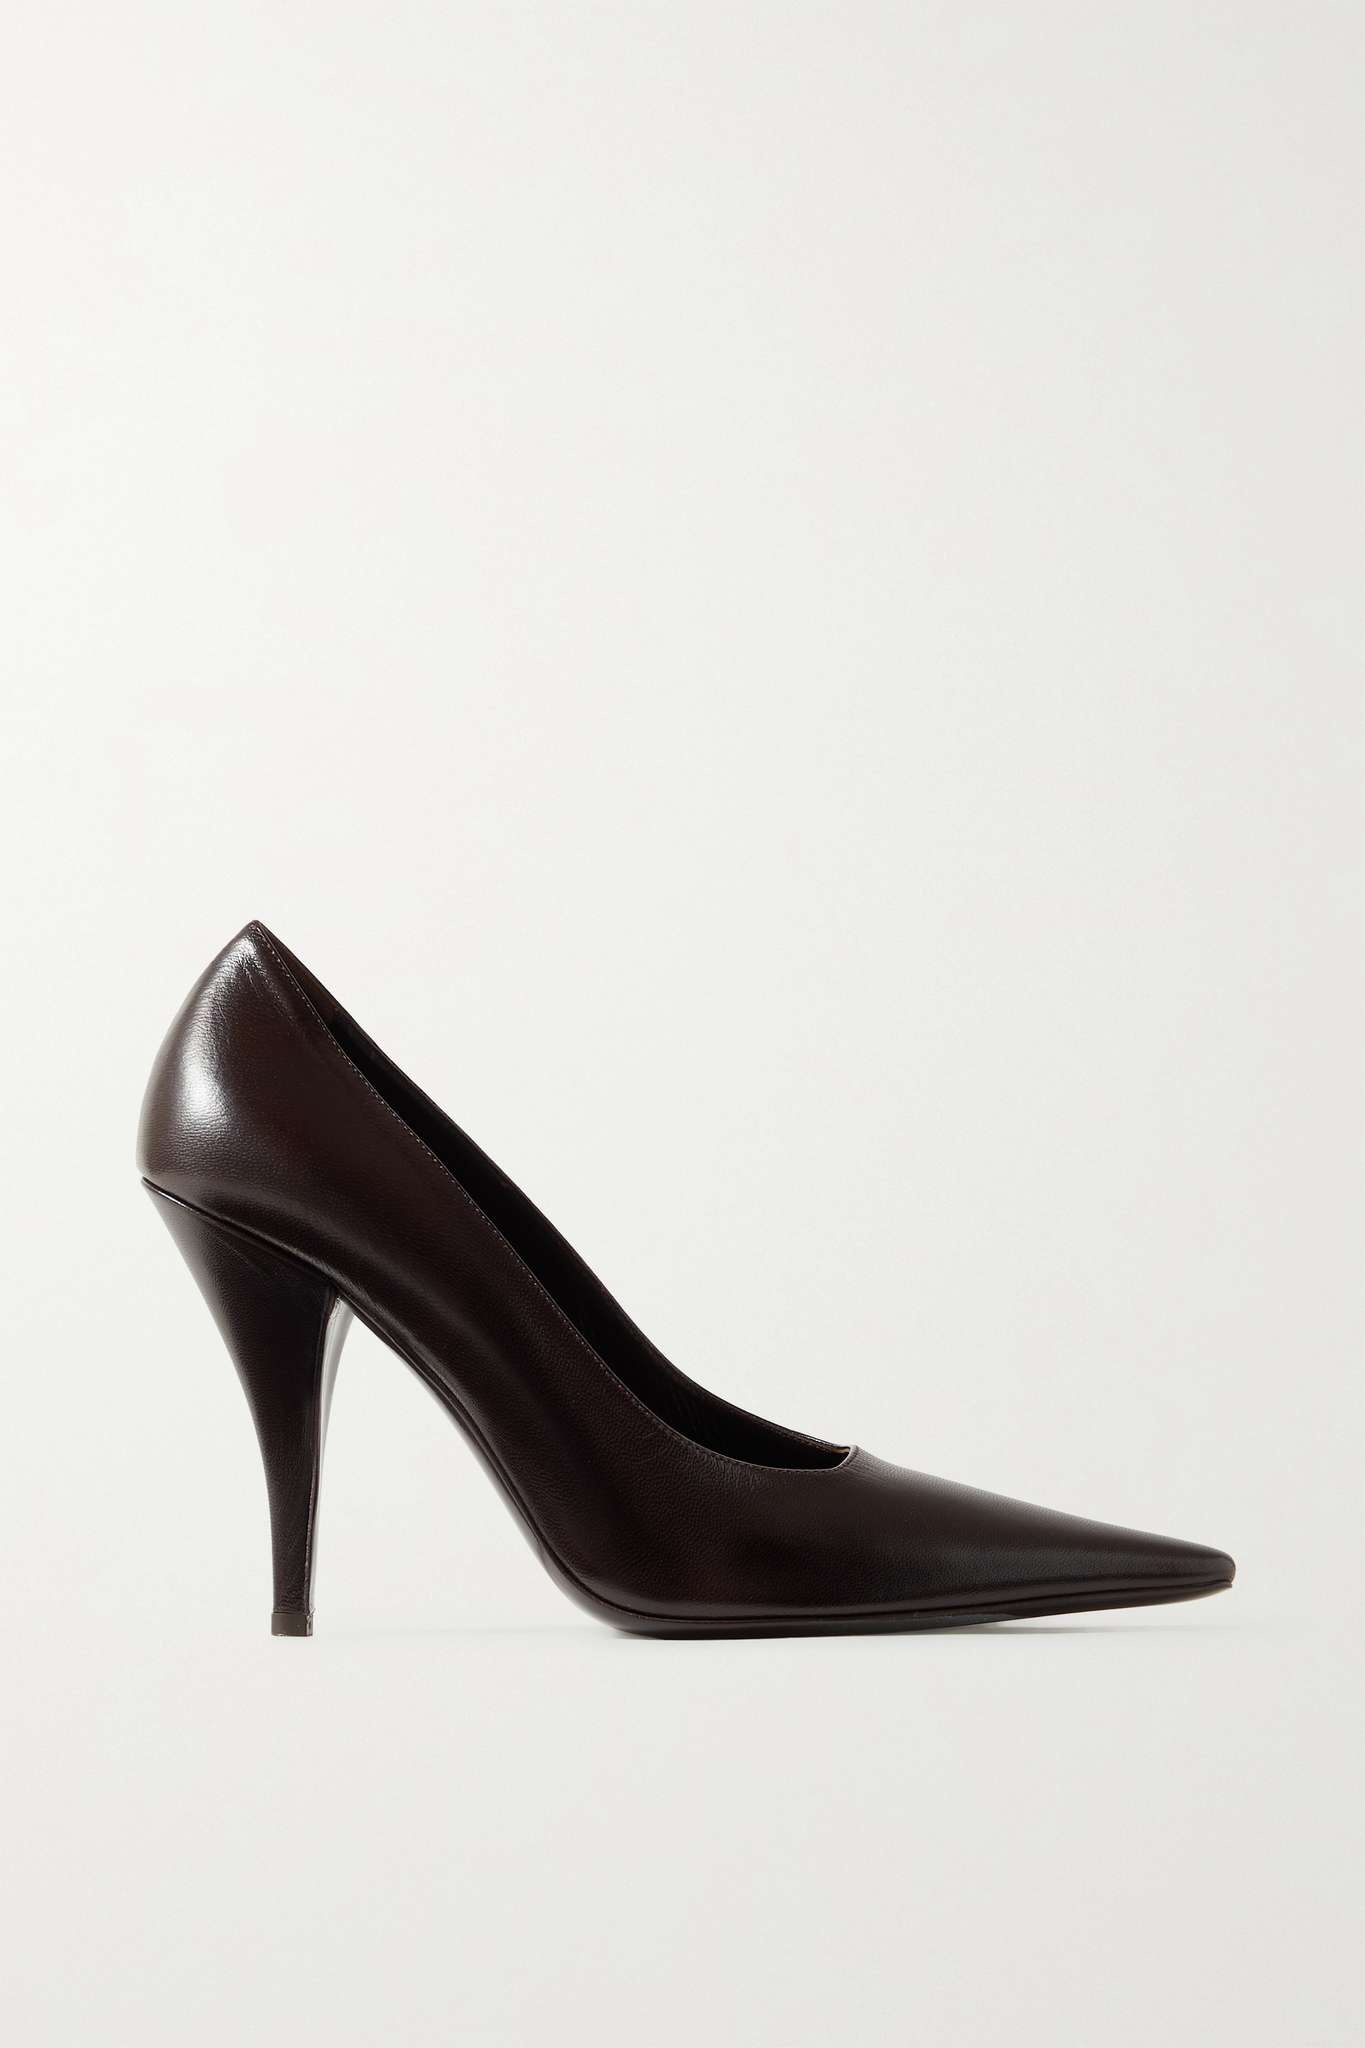 Lana leather point-toe pumps - 1